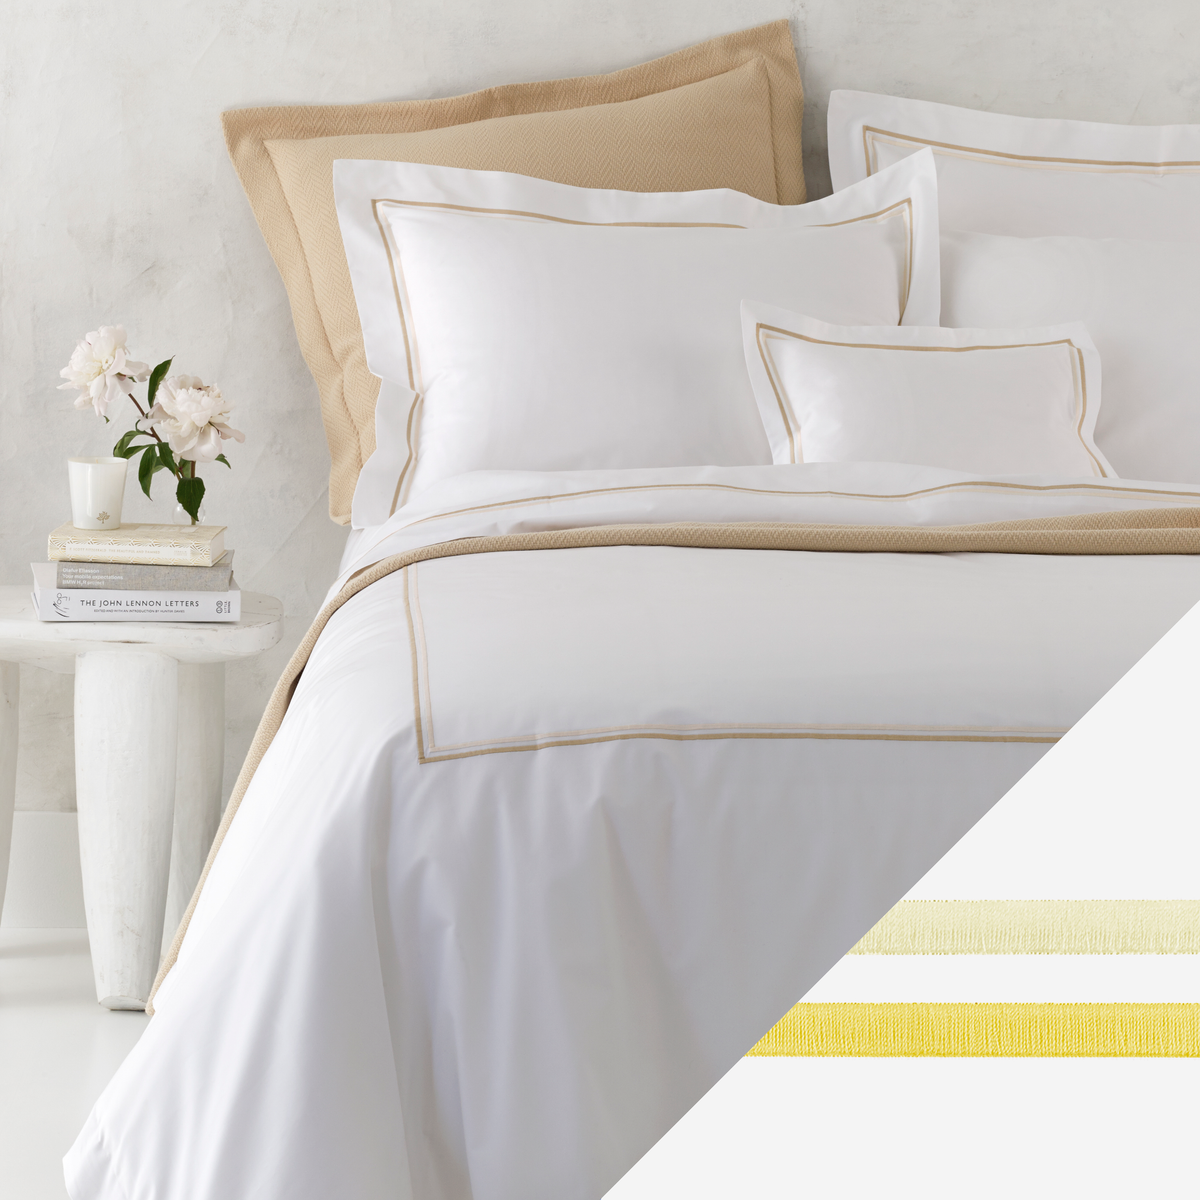 Corner Picture of Matouk Essex High End Bedding with Swatch in Lemon Color